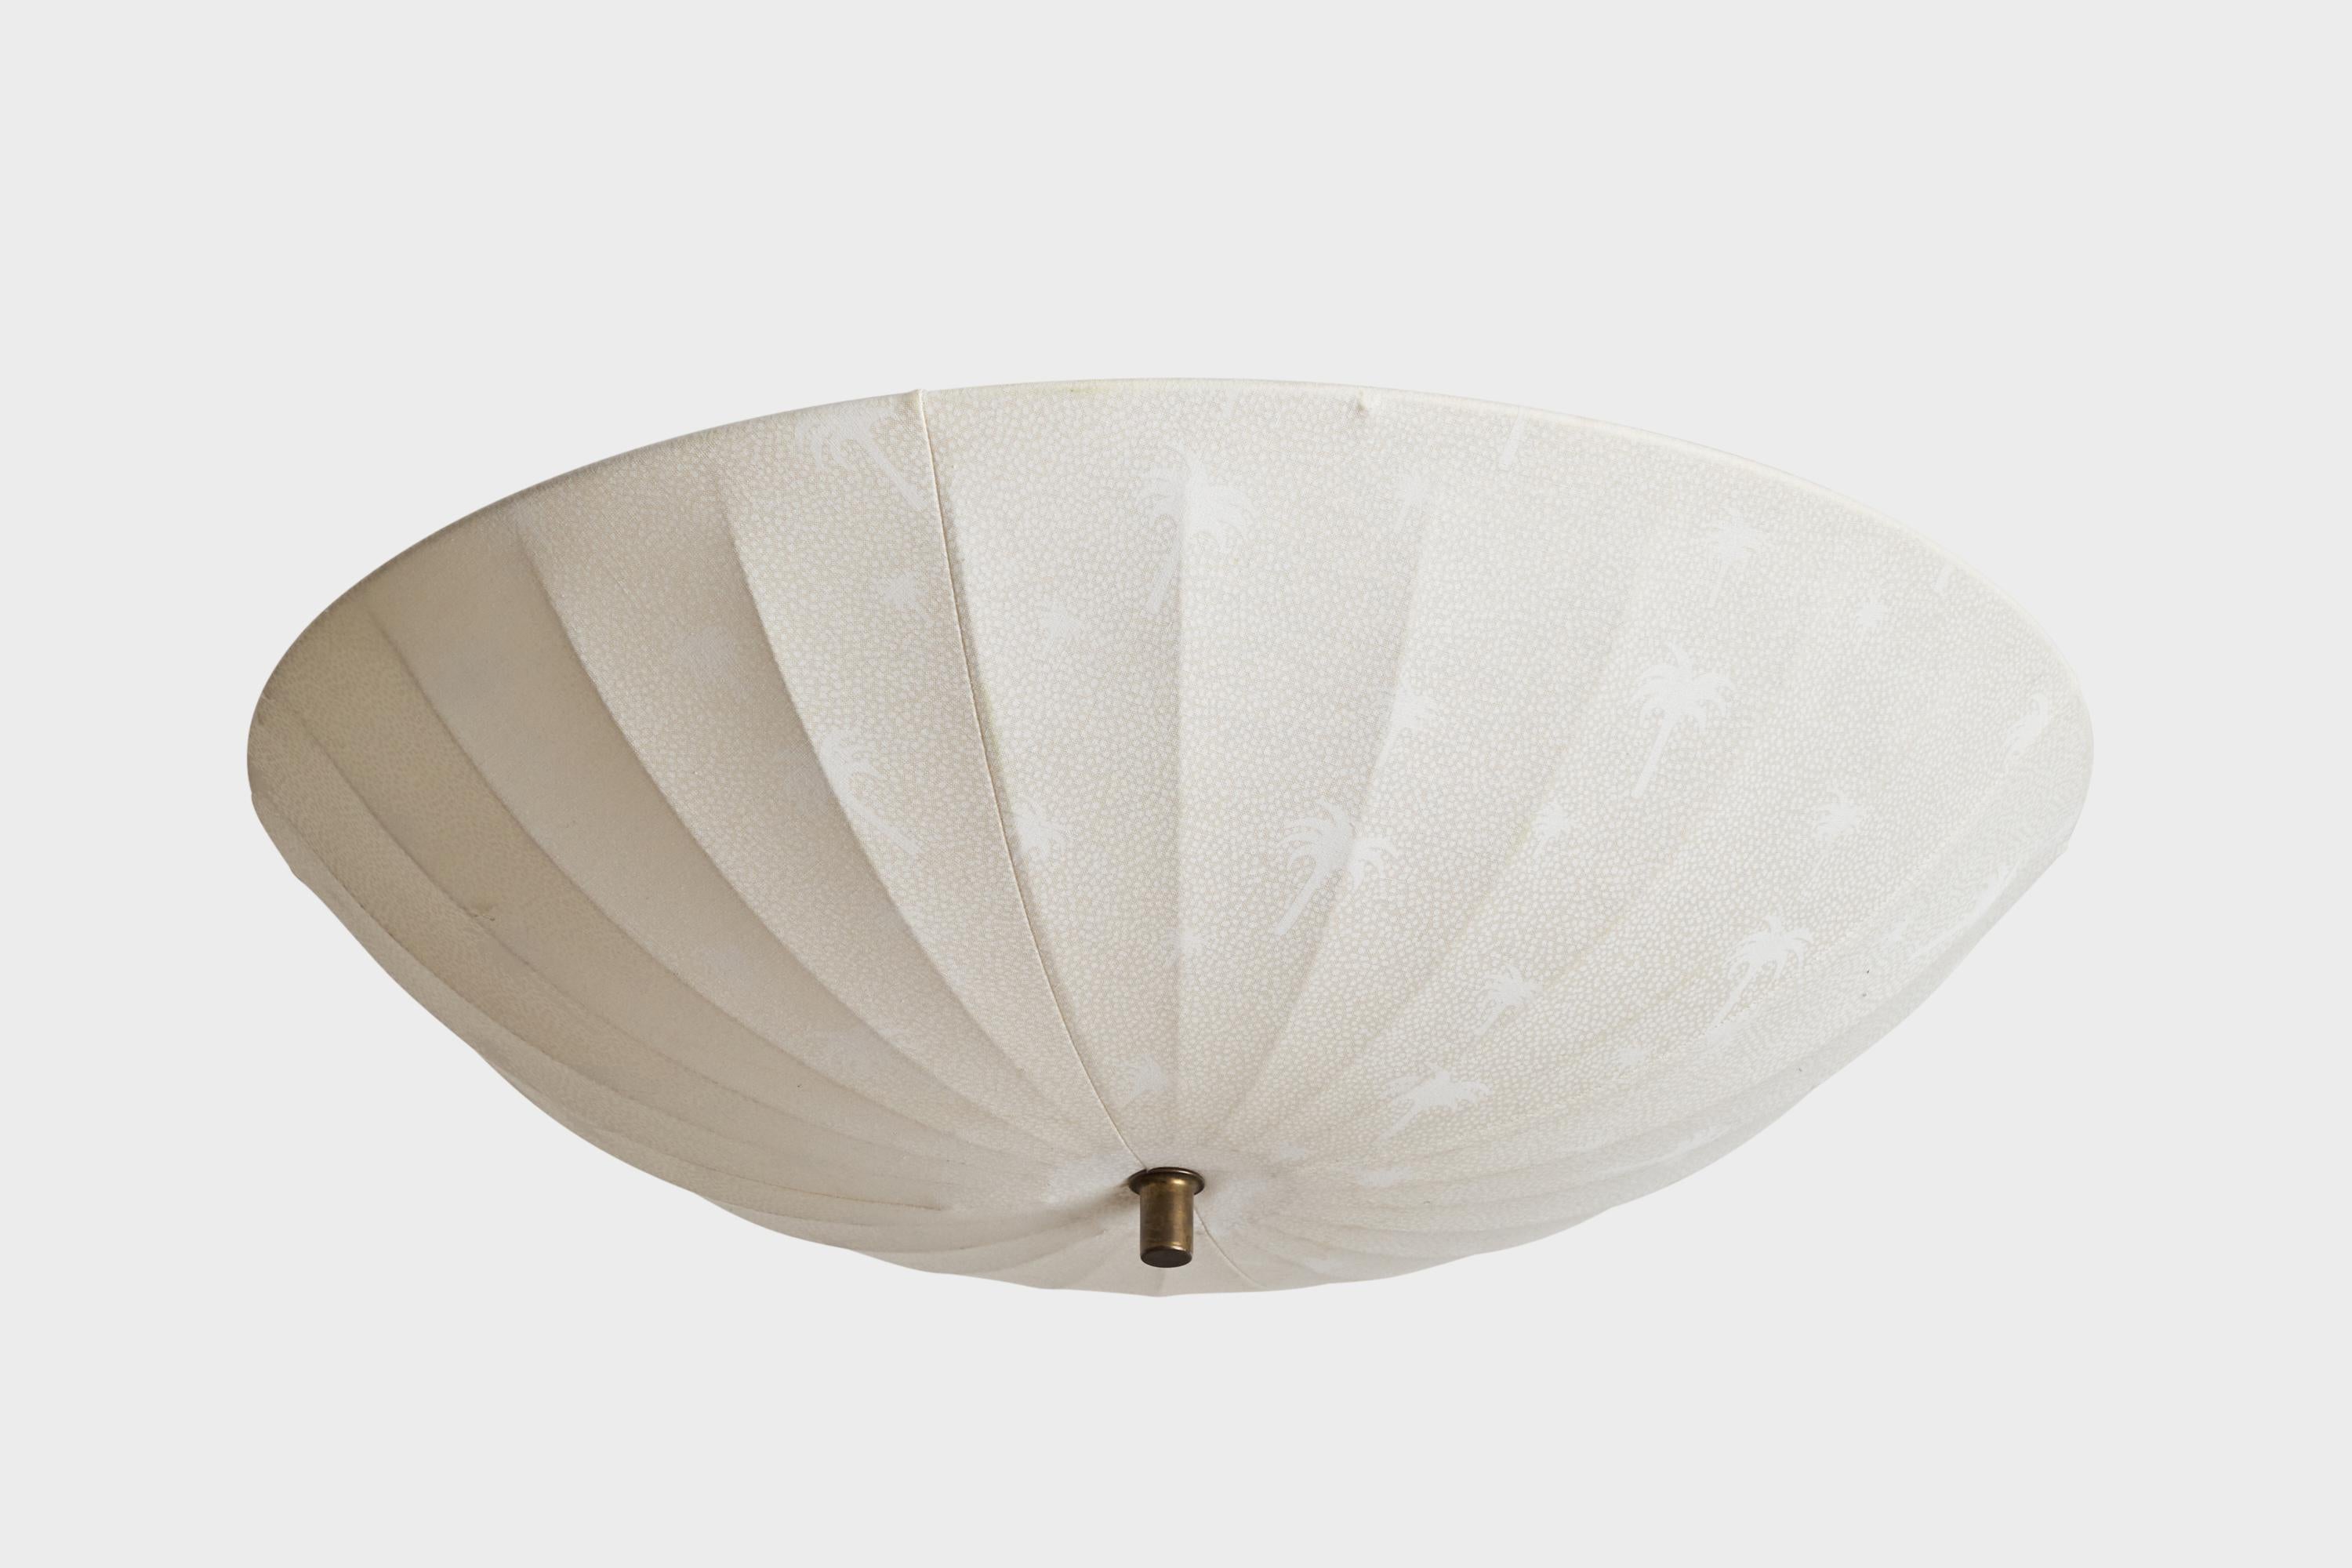 An off-white printed fabric and brass flush mount designed and produced in Sweden, c. 1970s.

Dimensions of canopy (inches): N/A
Socket takes standard E-26 bulbs. 2 sockets.There is no maximum wattage stated on the fixture. All lighting will be